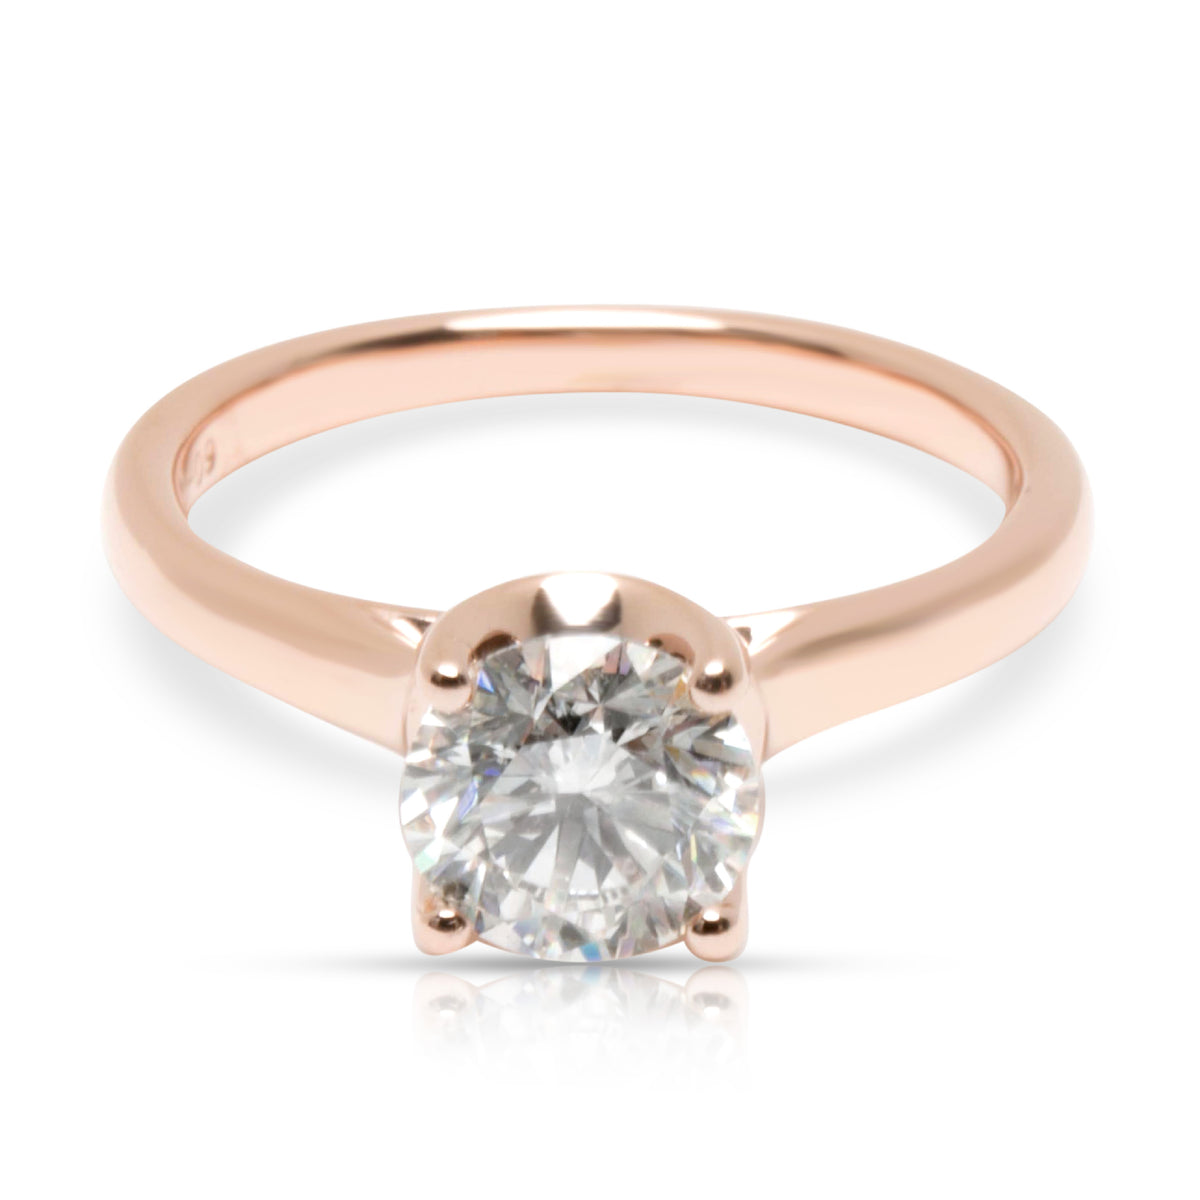 GIA Certified Diamond Solitaire Engagement Ring in 14K Rose Gold (1.00 ct H/SI2)